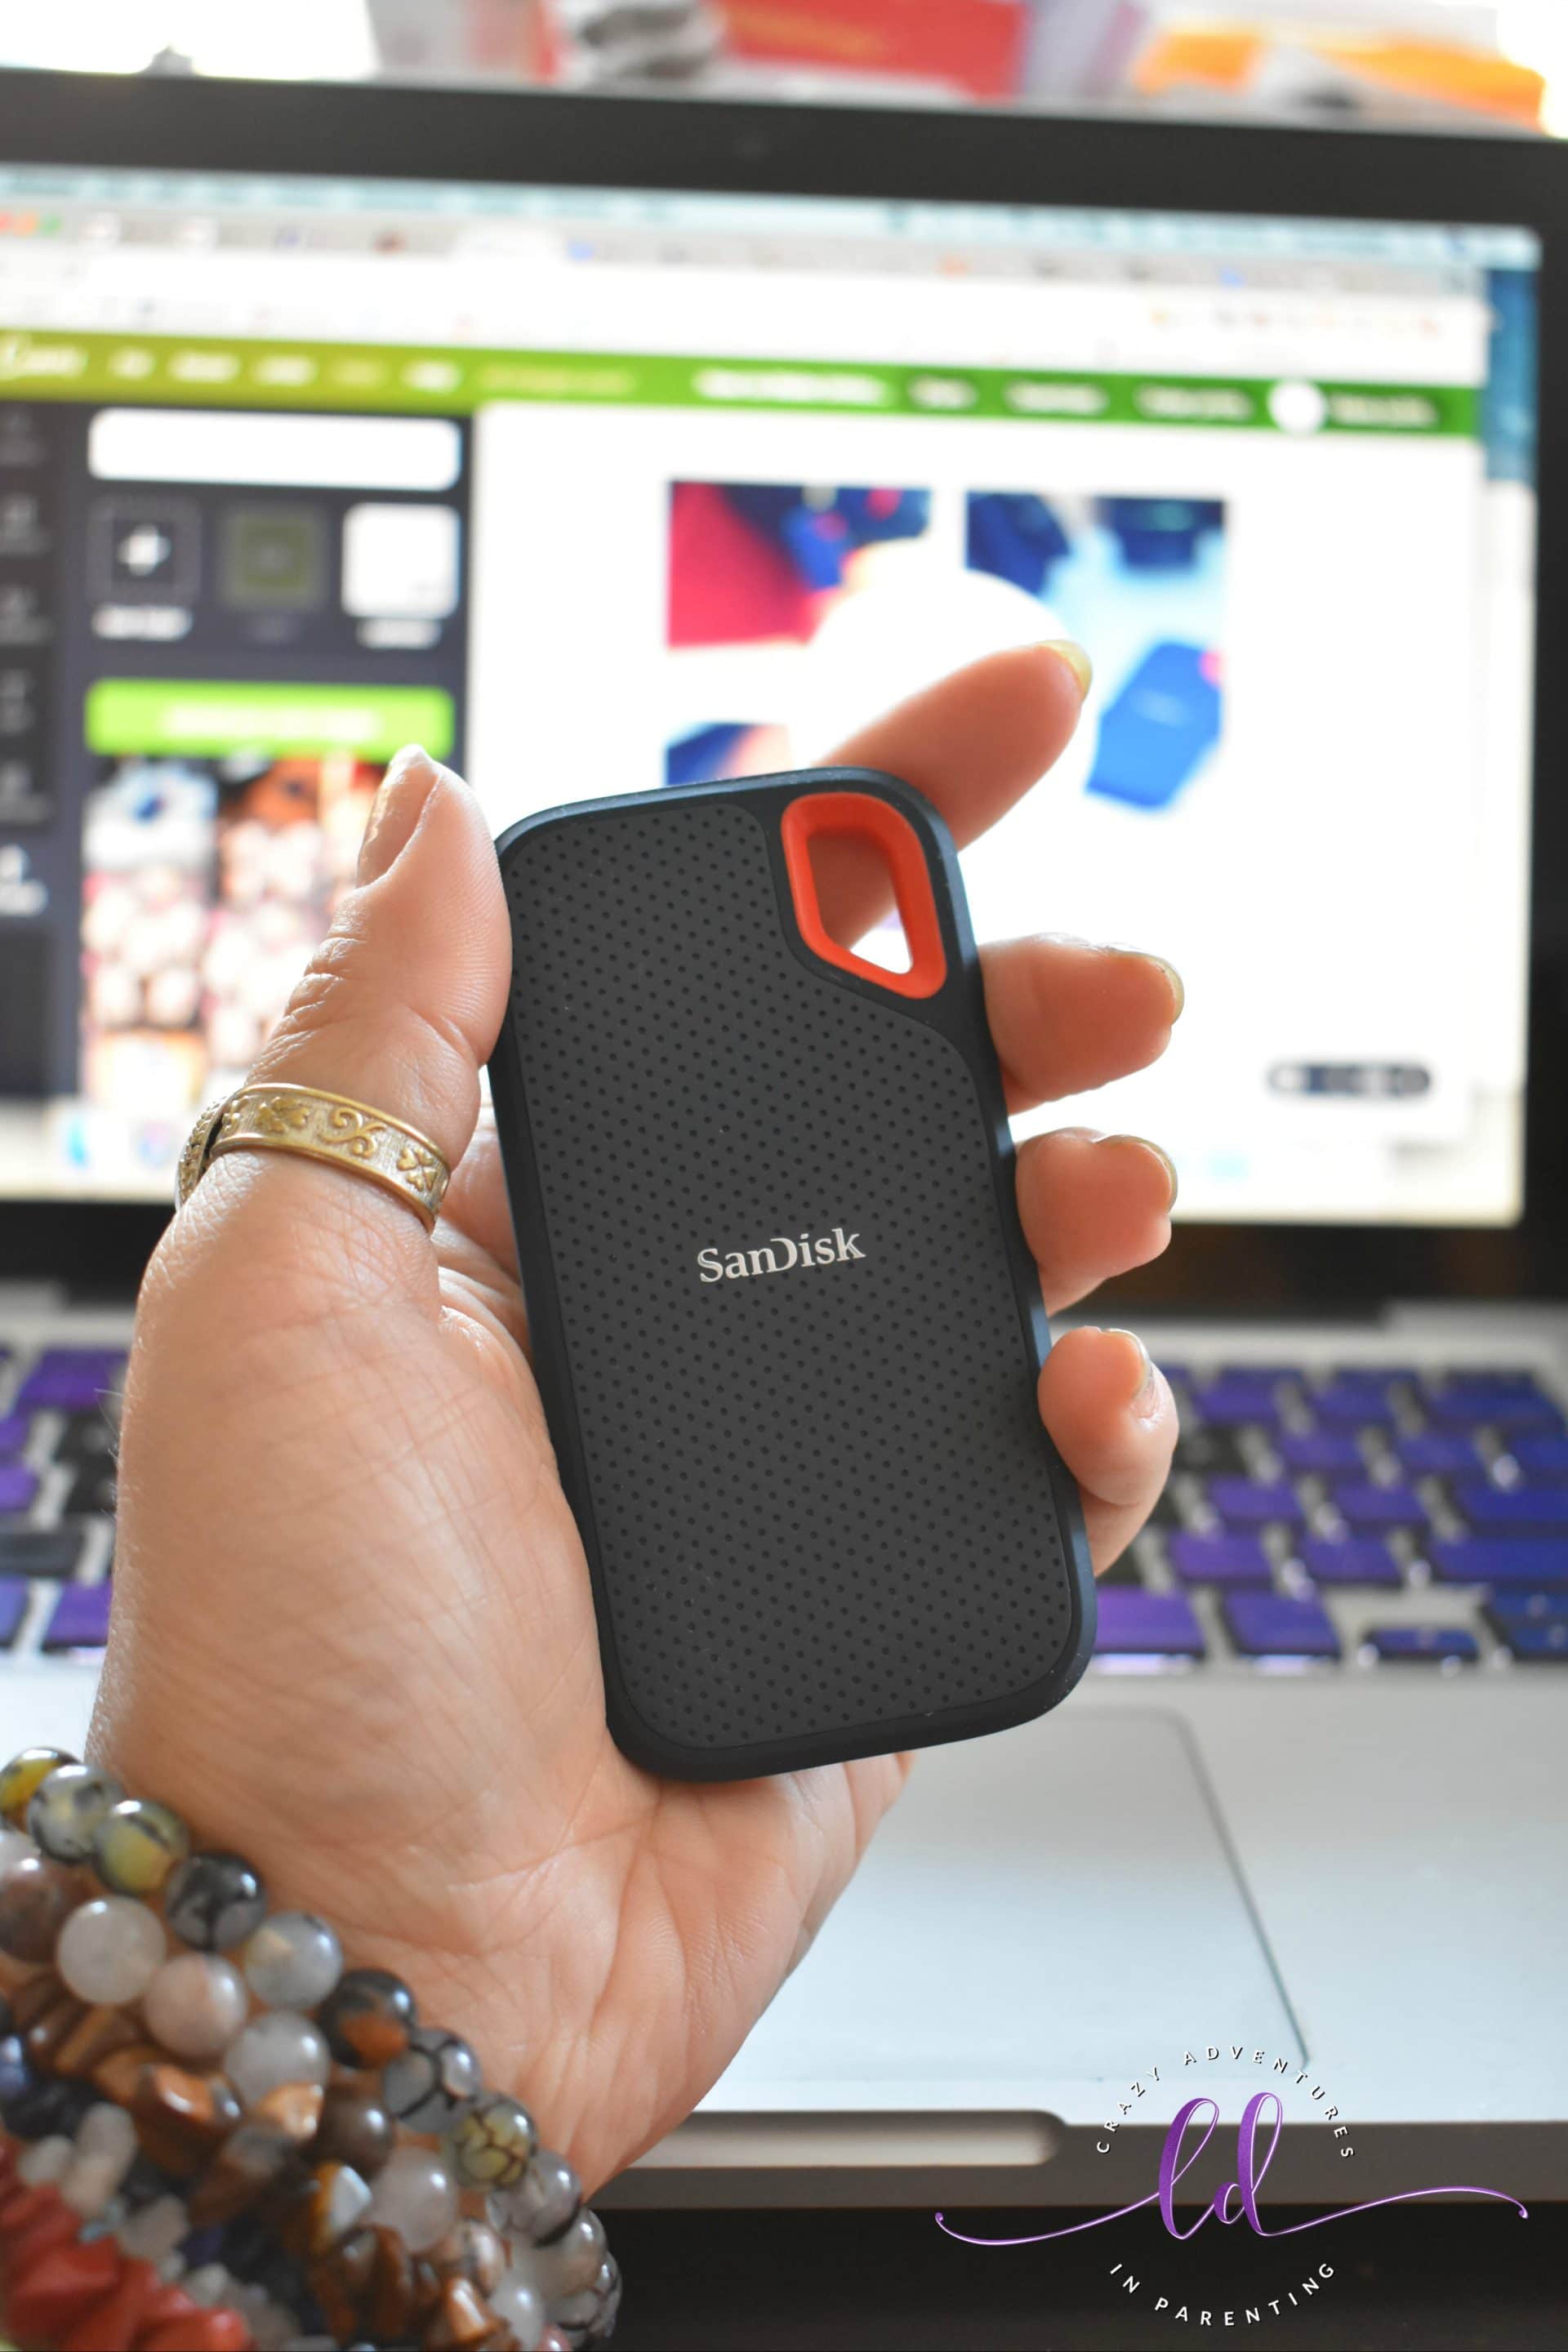 SanDisk Extreme Storage Available at Best Buy